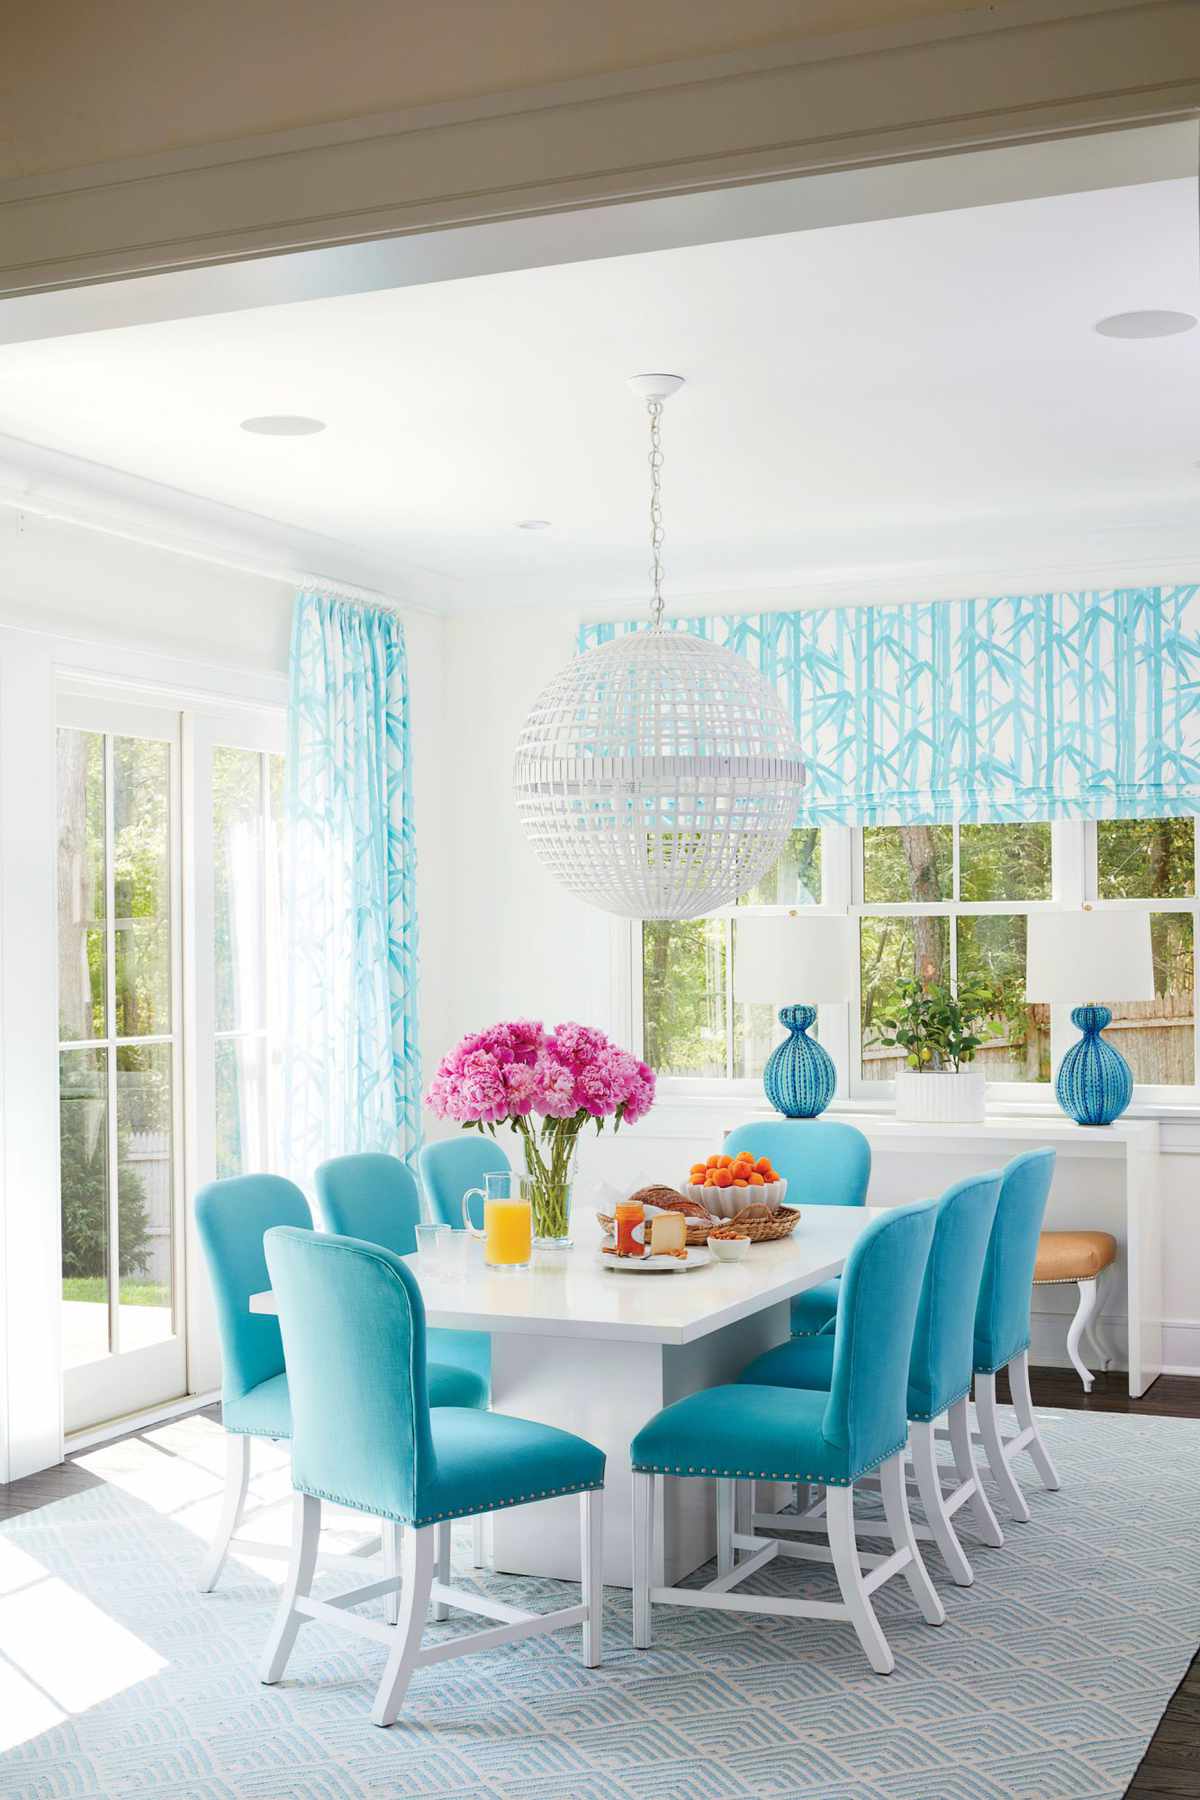 Beach House Dining Rooms Southern Living